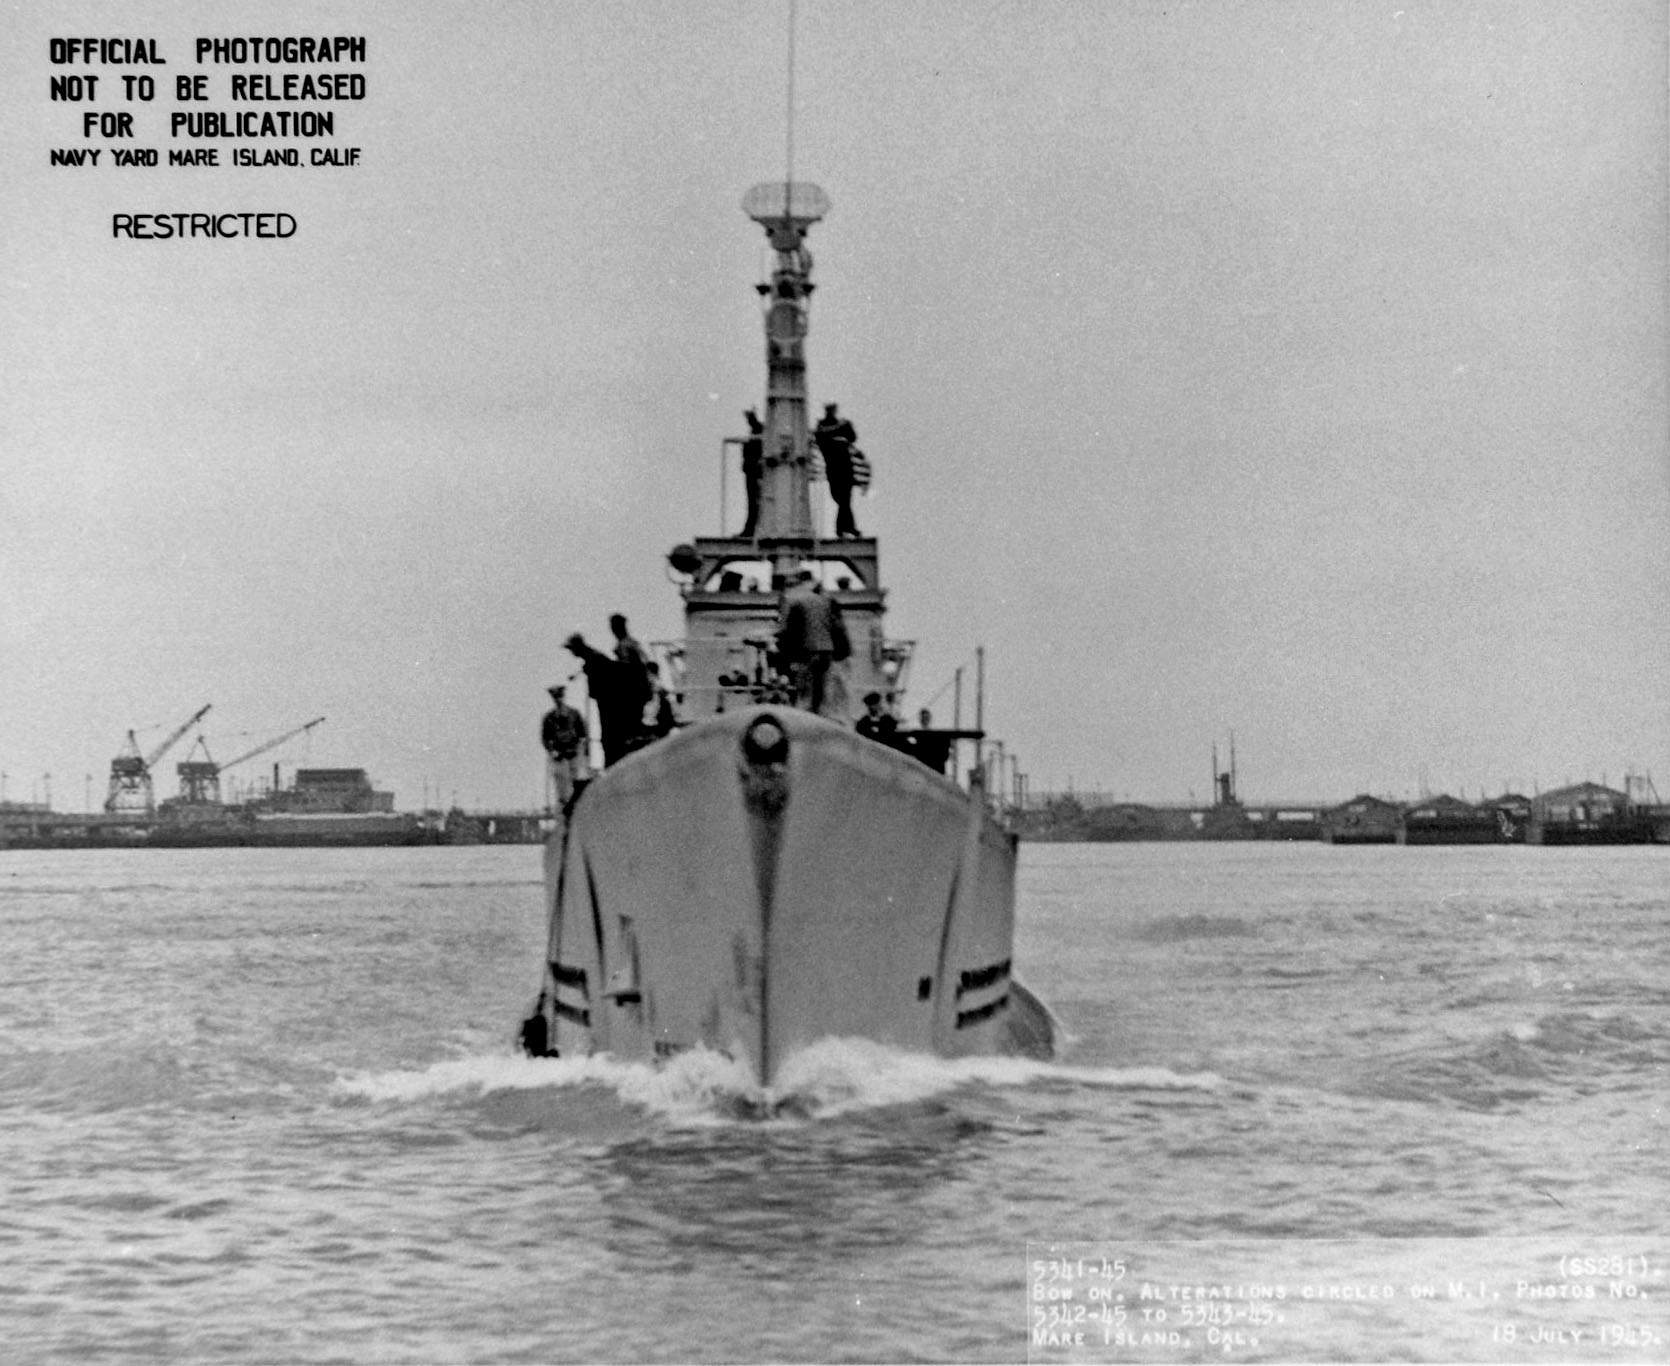 Bow view of USS Sunfish off Mare Island Navy Yard, Vallejo, California, United States, 18 Jul 1945